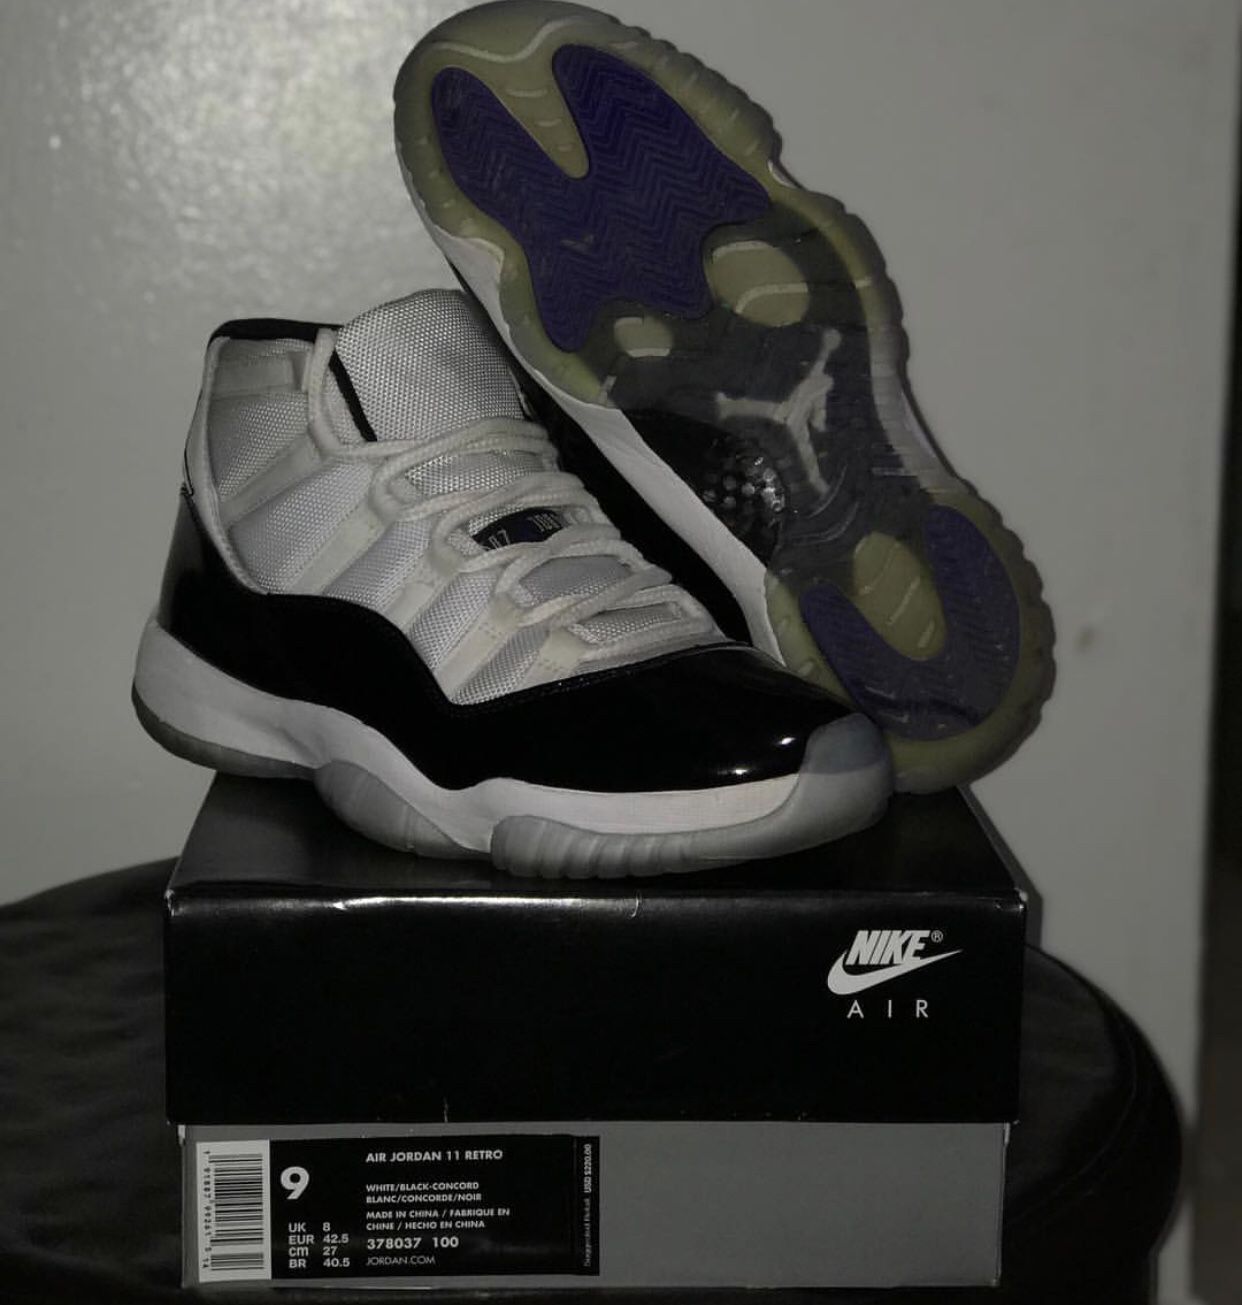 Used very clean concord 11 size 9